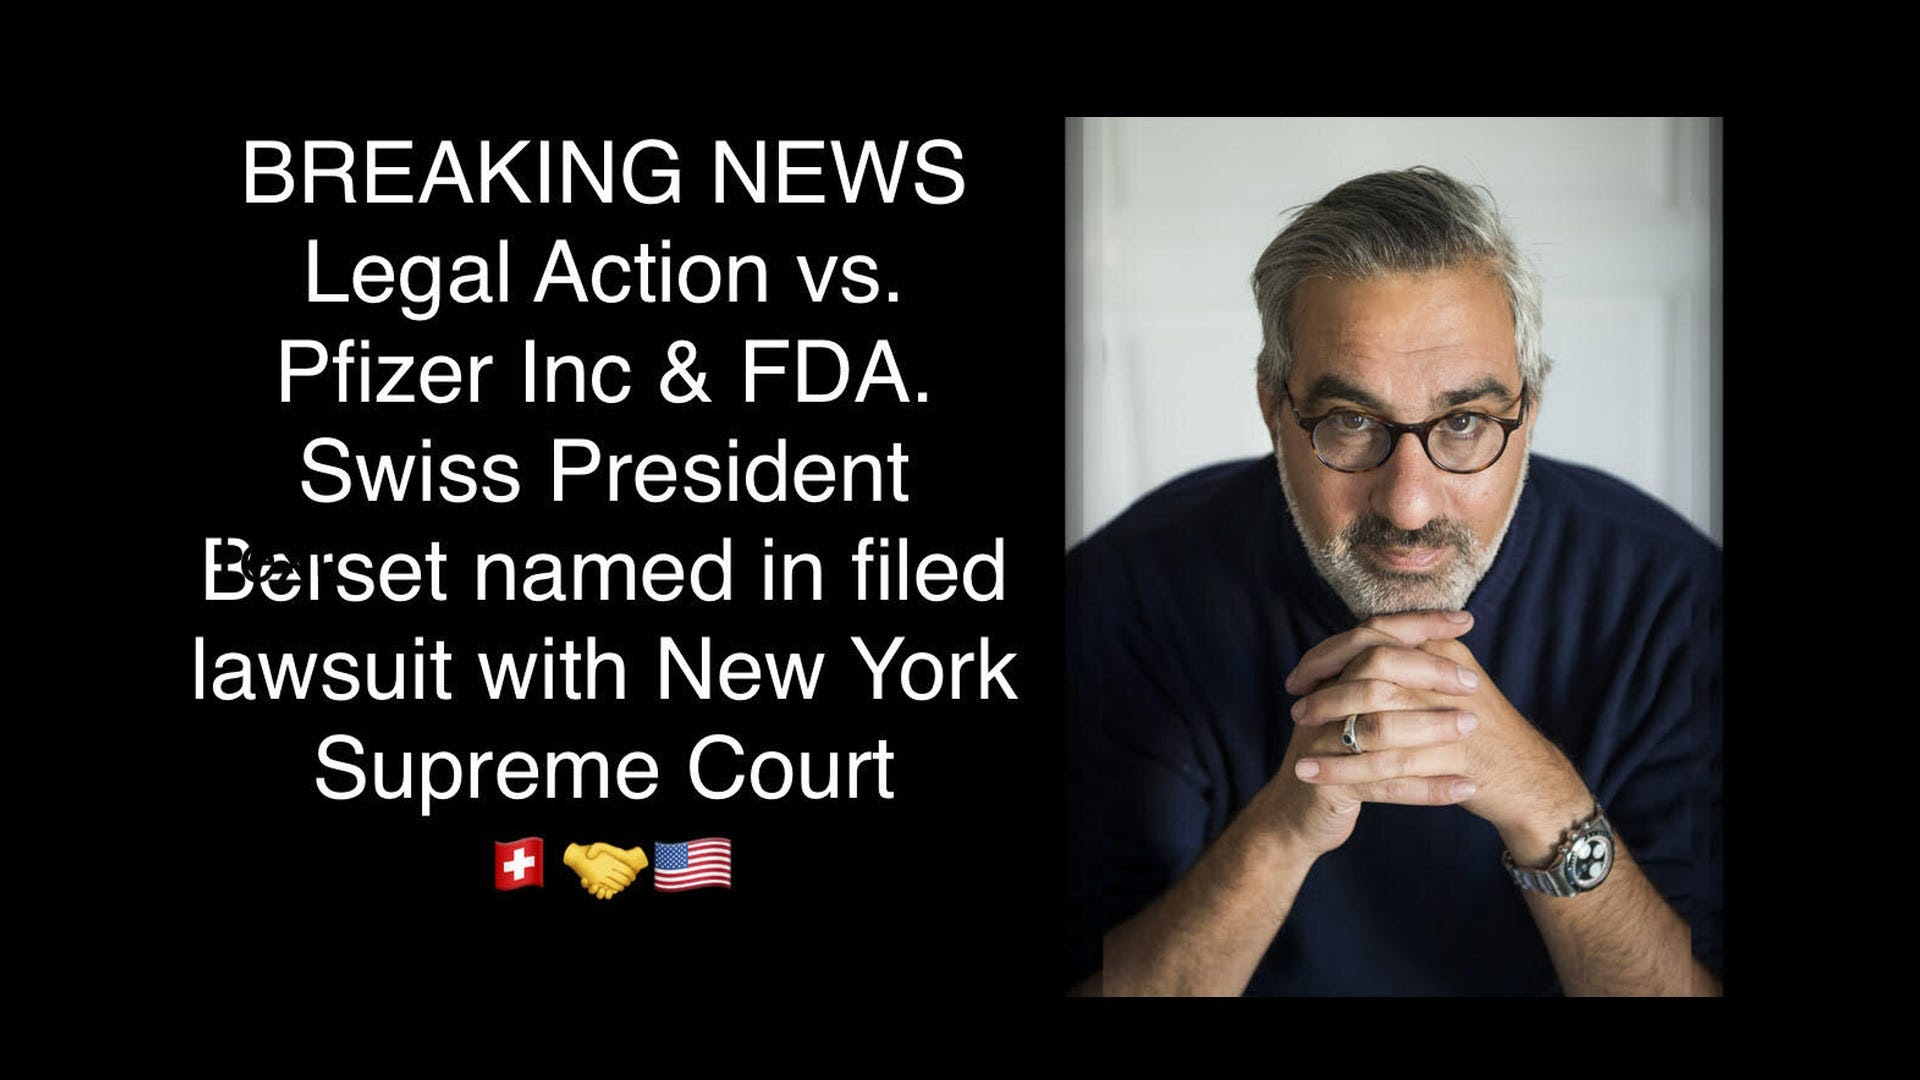  Pfizer Inc & US Food & Drug Administration Named in NY Supreme Court Lawsuit  Https%3A%2F%2Fsubstack-post-media.s3.amazonaws.com%2Fpublic%2Fimages%2F5dfc8f6a-4f7a-4f92-8e39-d50ac982b6d2_1920x1080